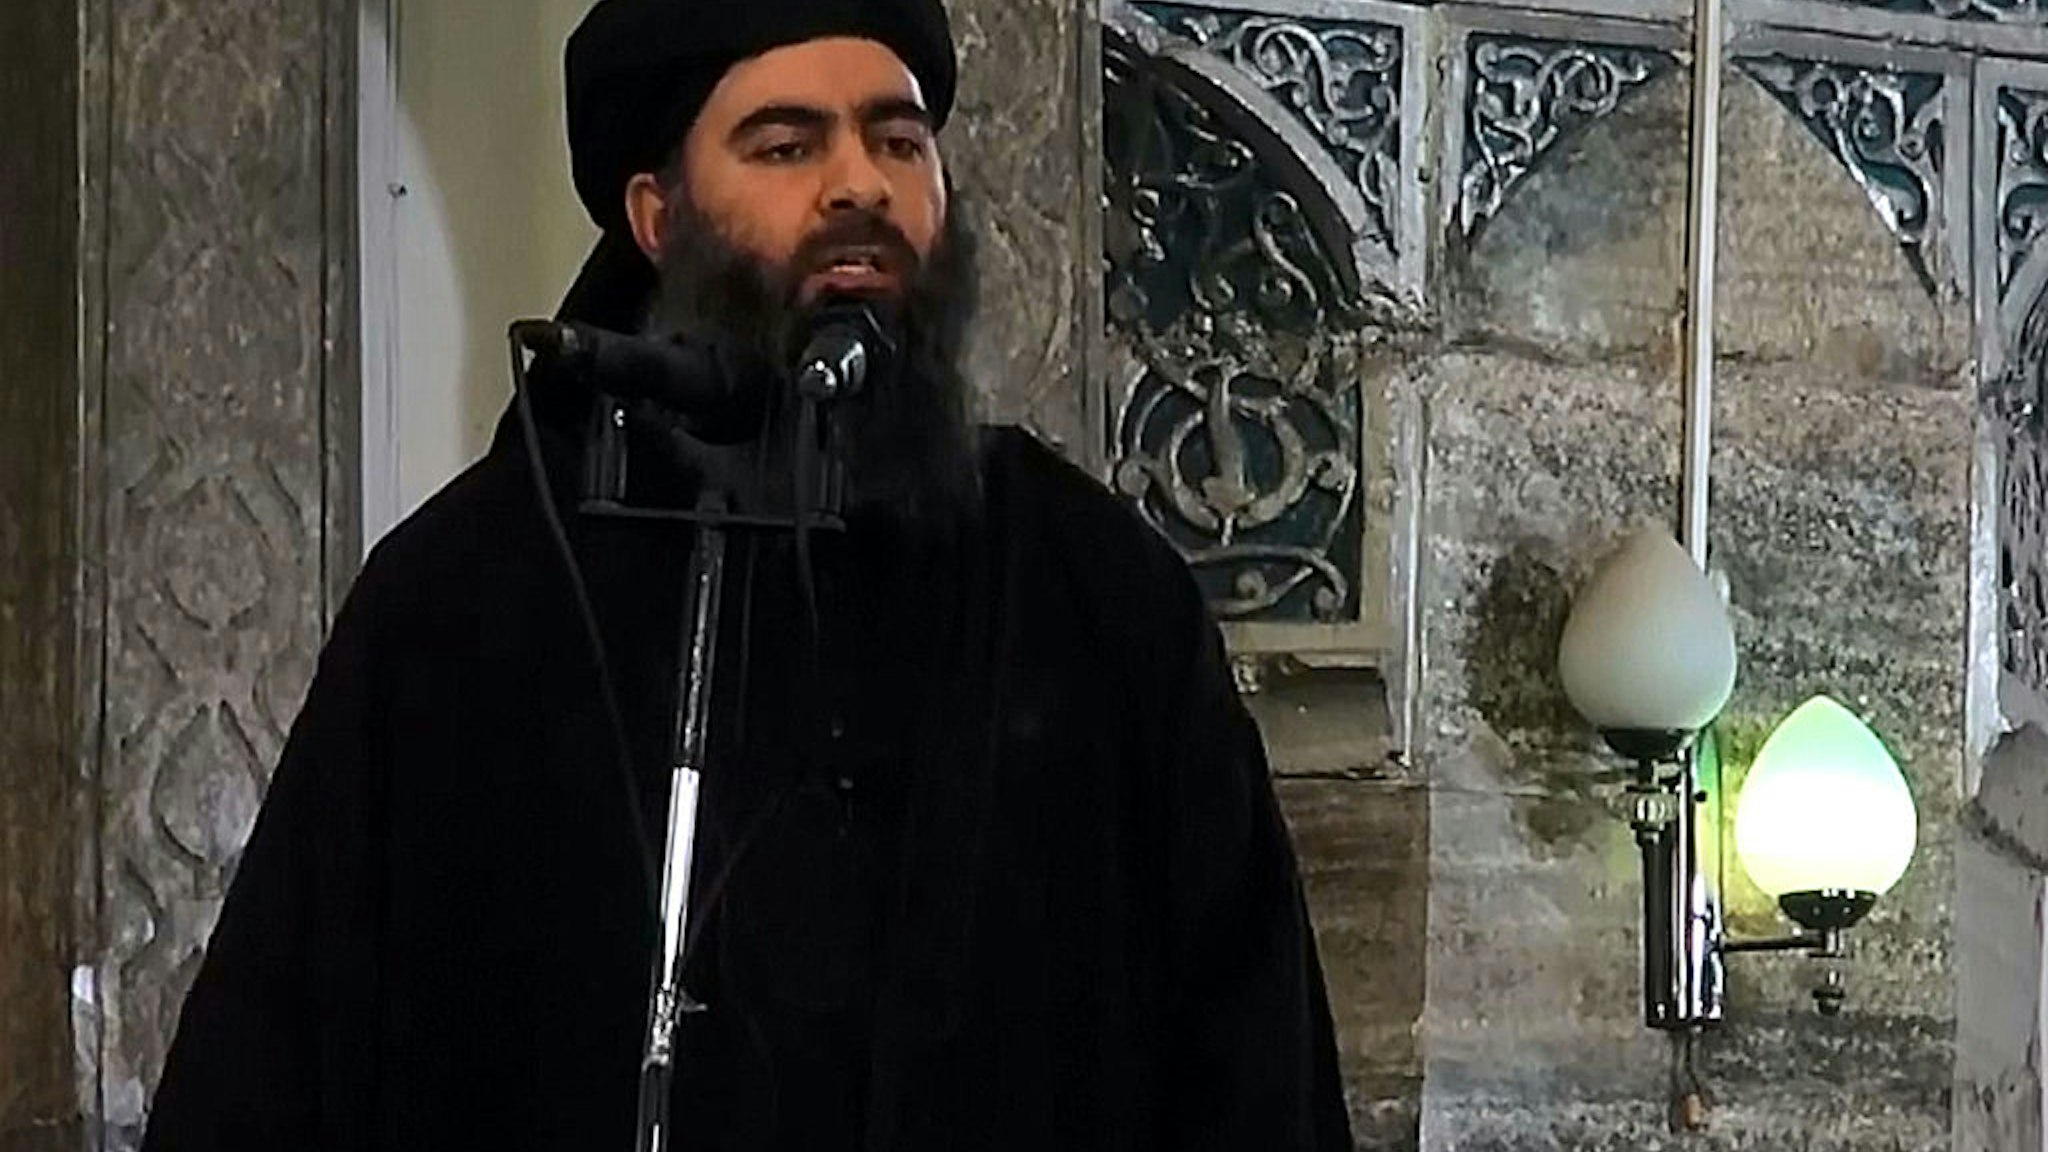 MOSUL, IRAQ - JULY 5 : An image grab taken from a video released on July 5, 2014 by Al-Furqan Media shows alleged Islamic State of Iraq and the Levant (ISIL) leader Abu Bakr al-Baghdadi preaching during Friday prayer at a mosque in Mosul.